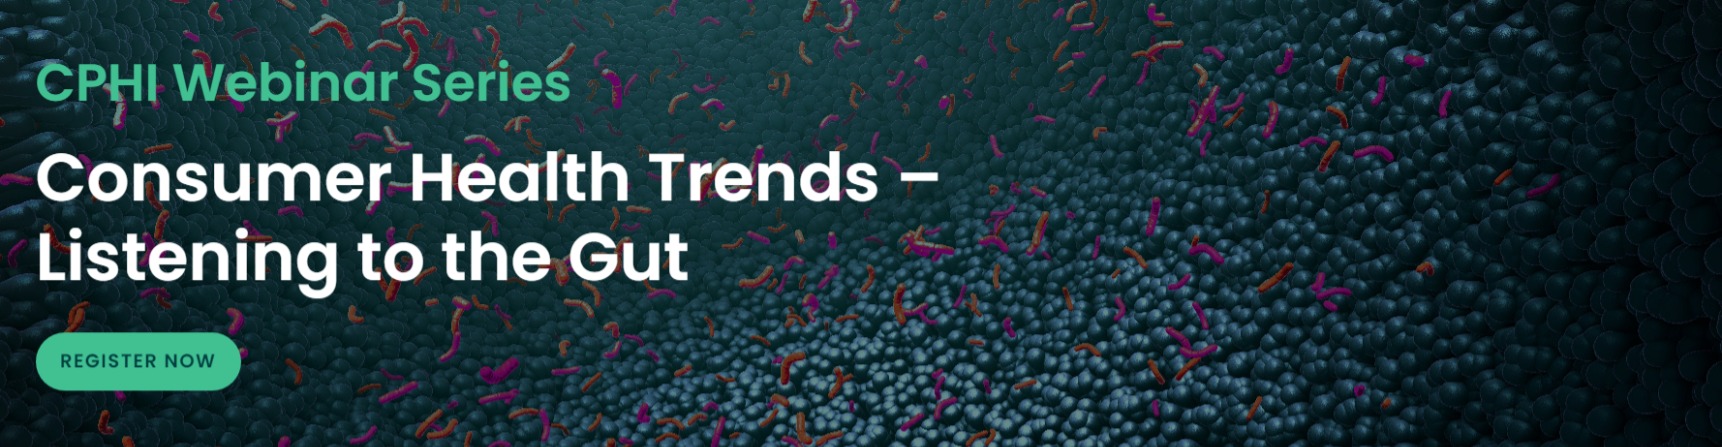 Consumer Health Trends  Listening to the Gut